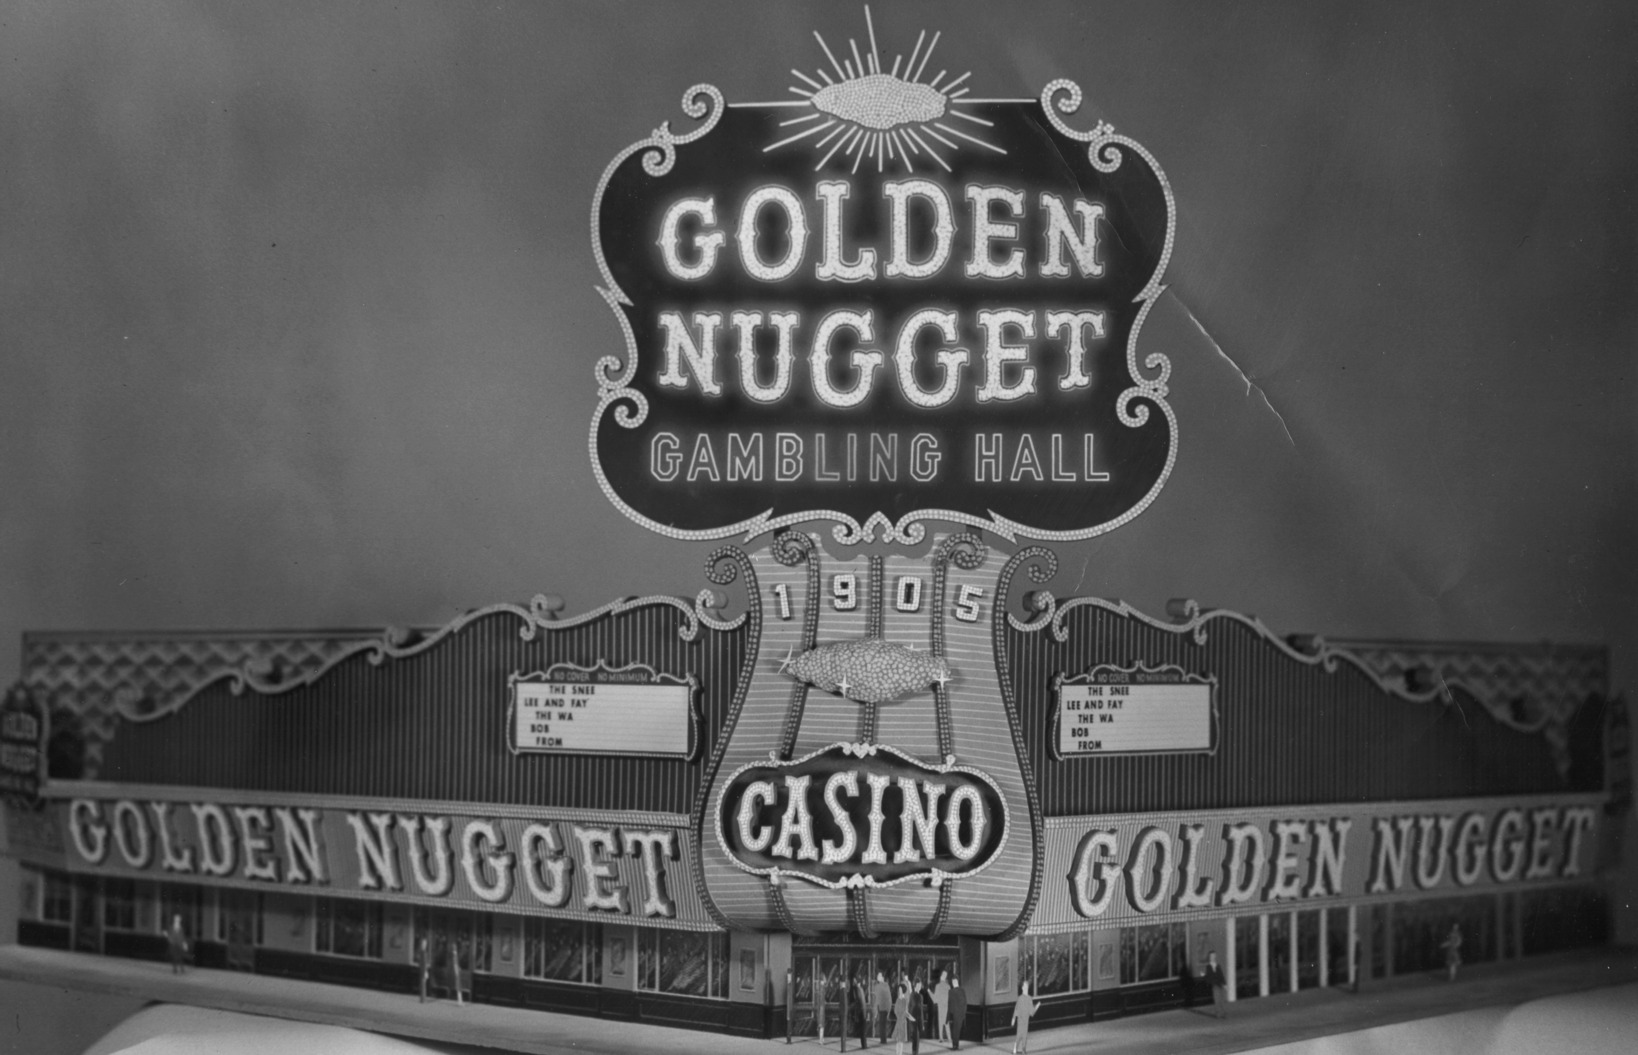 Photograph of a scale model of the Golden Nugget Gambling Hall (Las Vegas), 1958